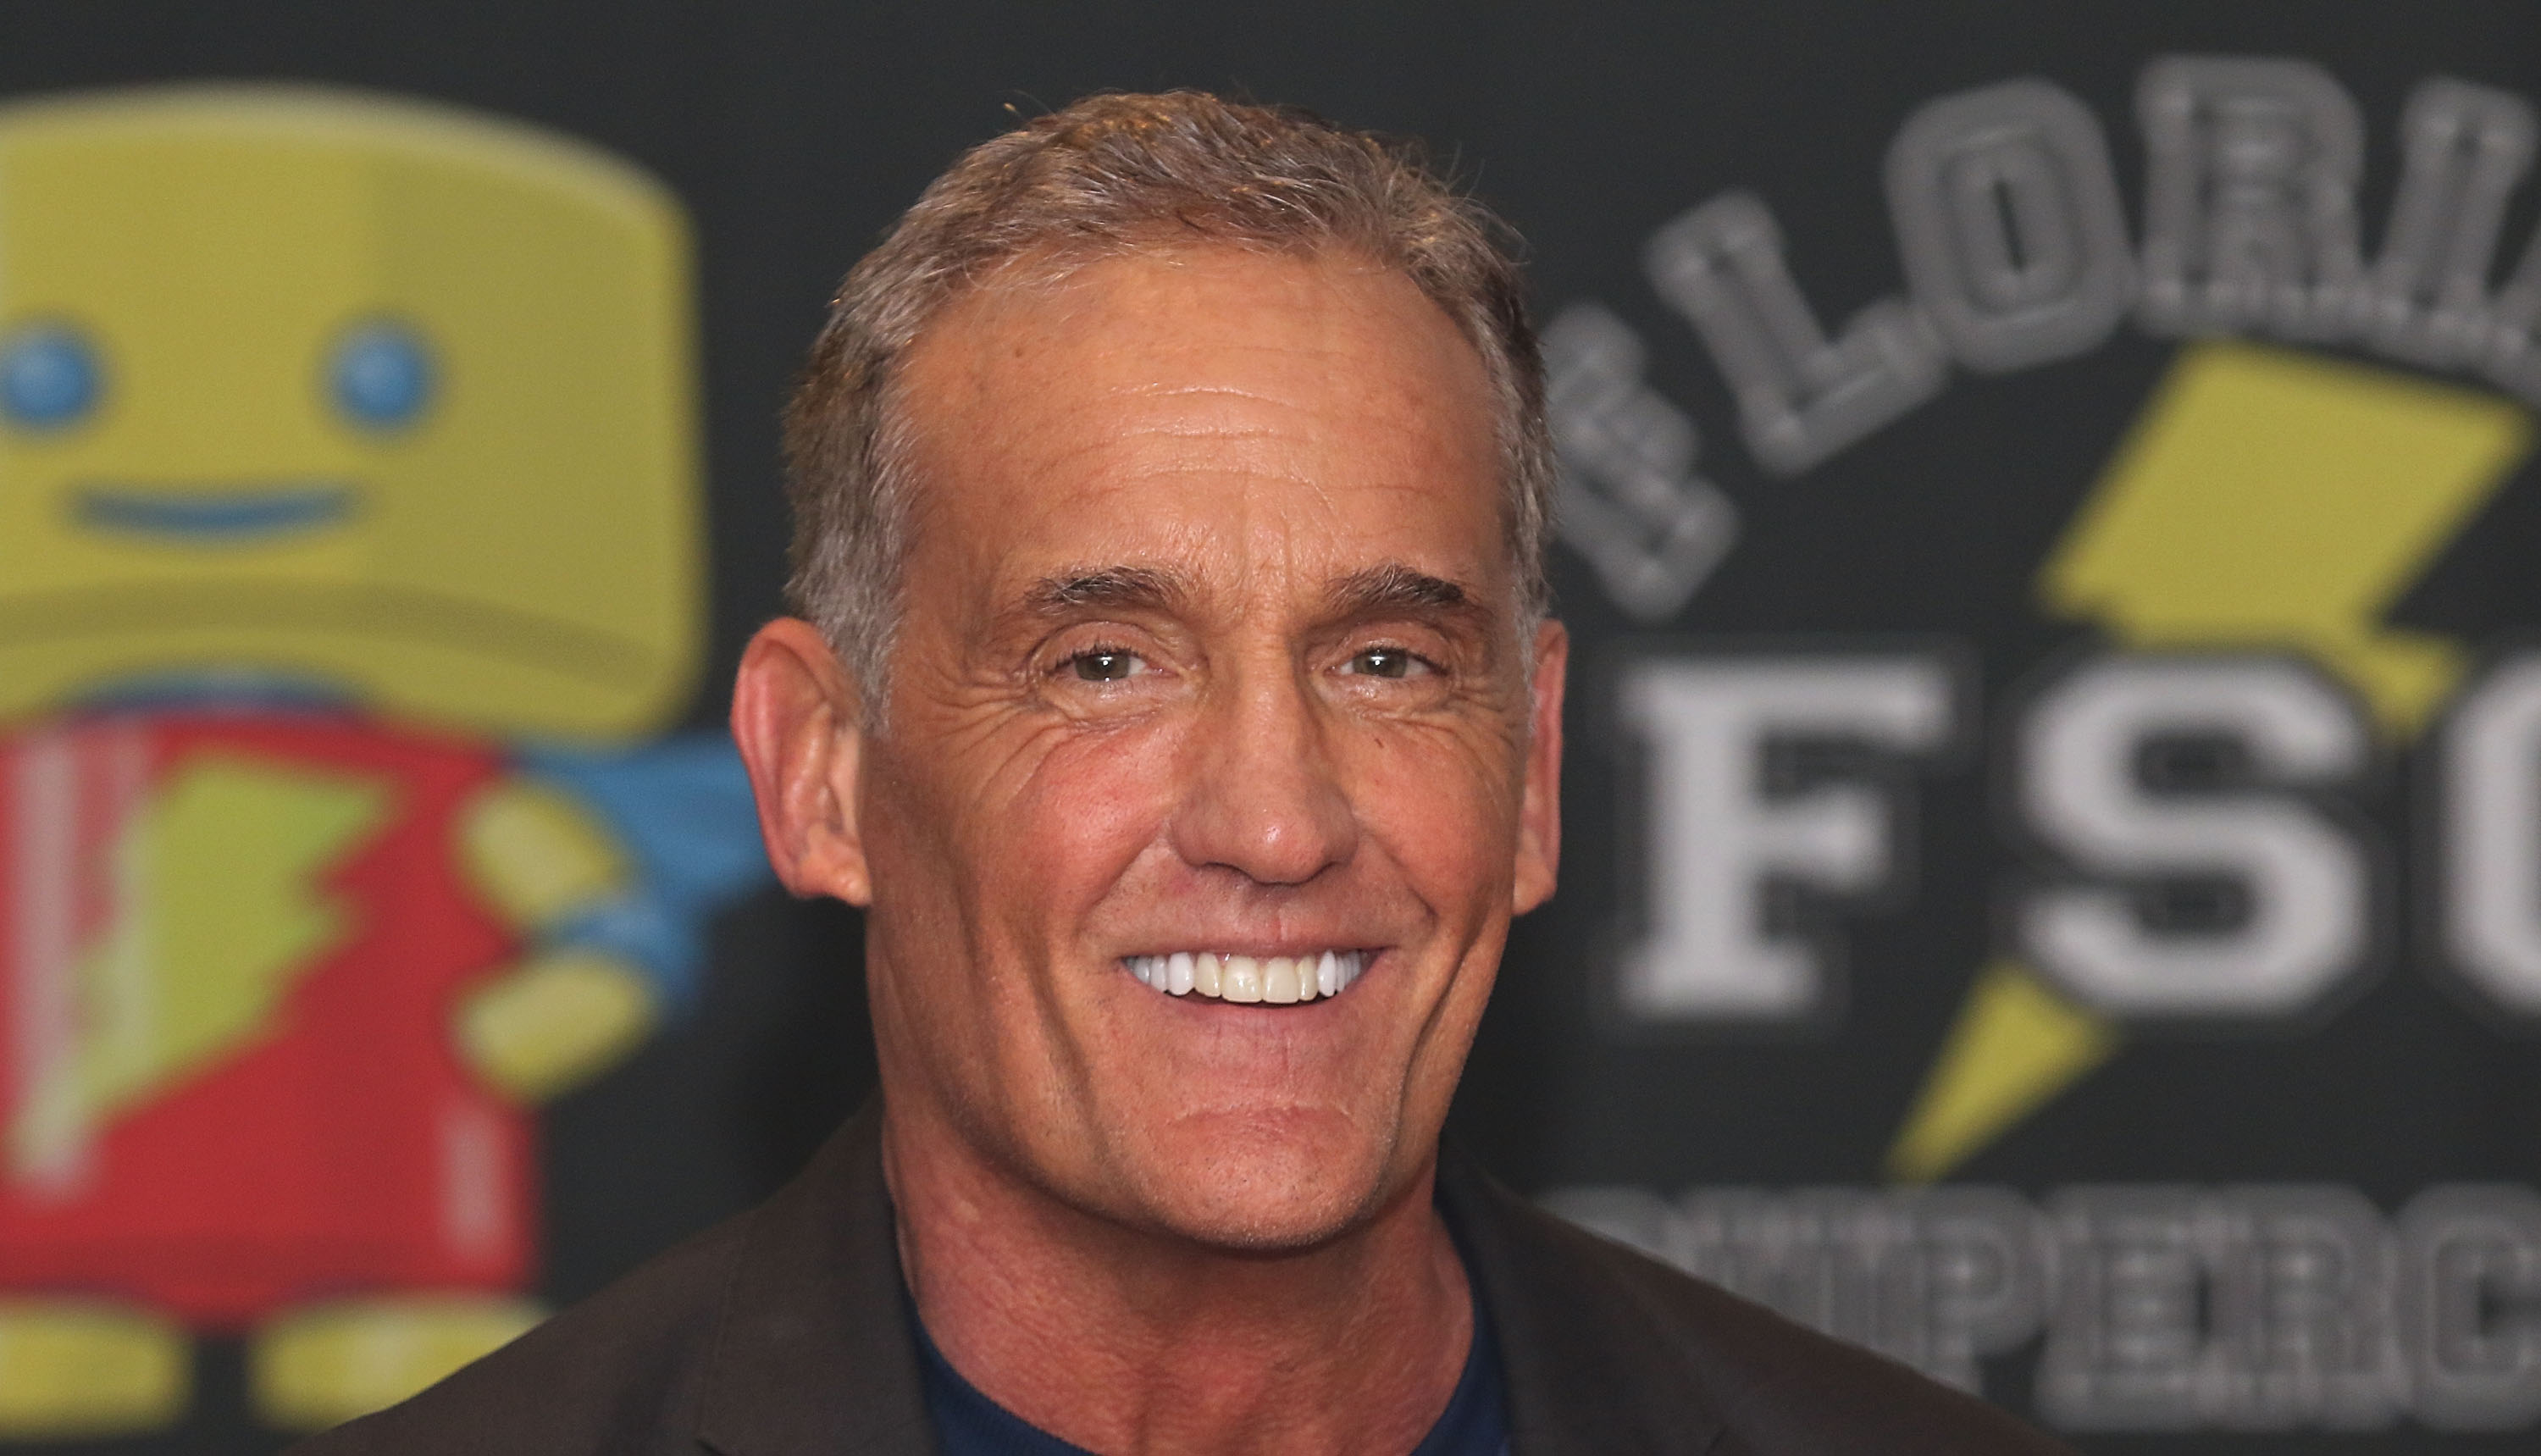 'Stargirl' actor John Wesley Shipp wears a suit and smiles for cameras.